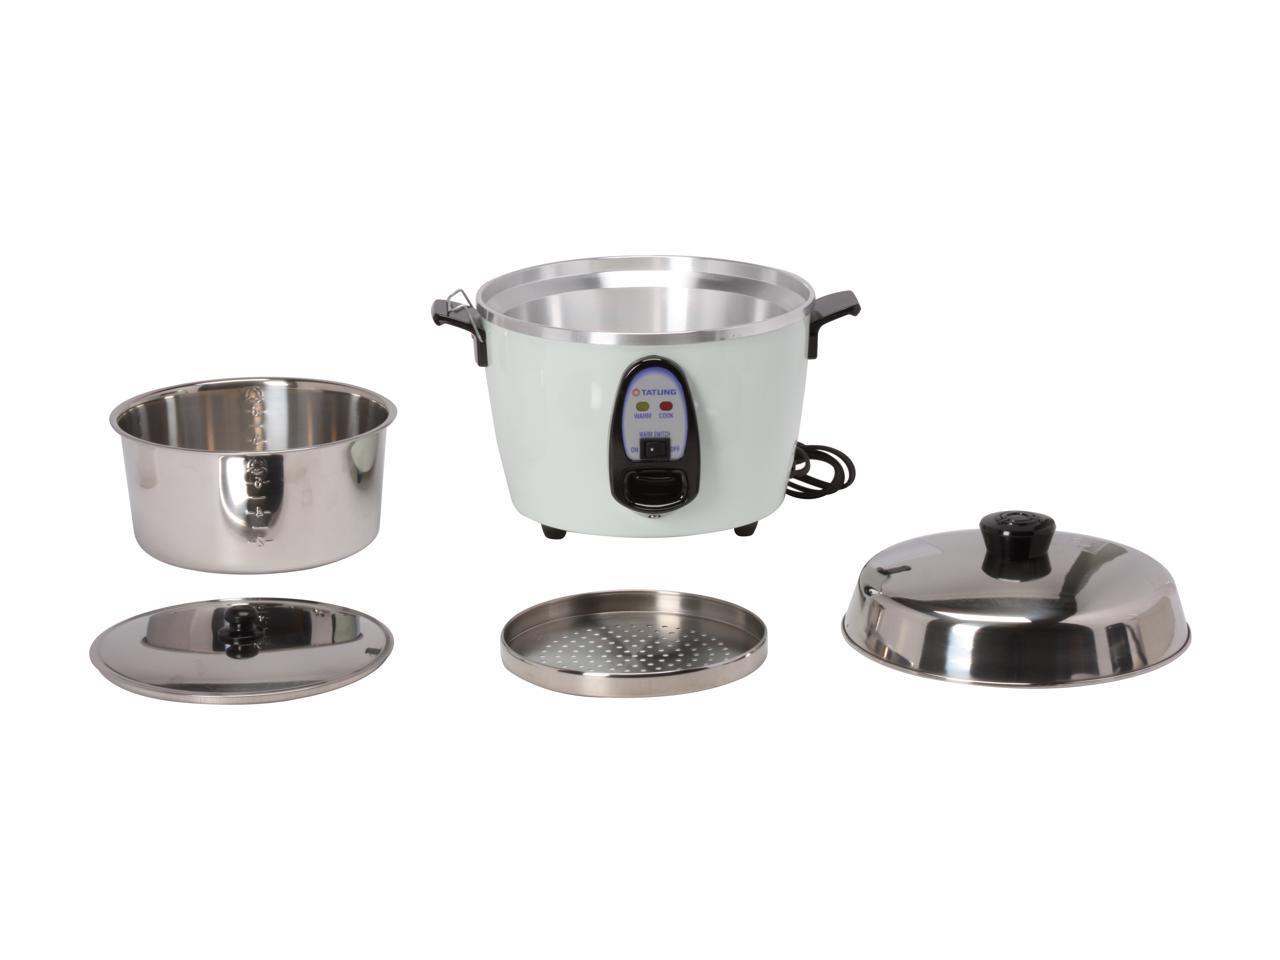 Tatung TAC-6GS-CP 6-Cup Multifunctional Cooker, Champagne 